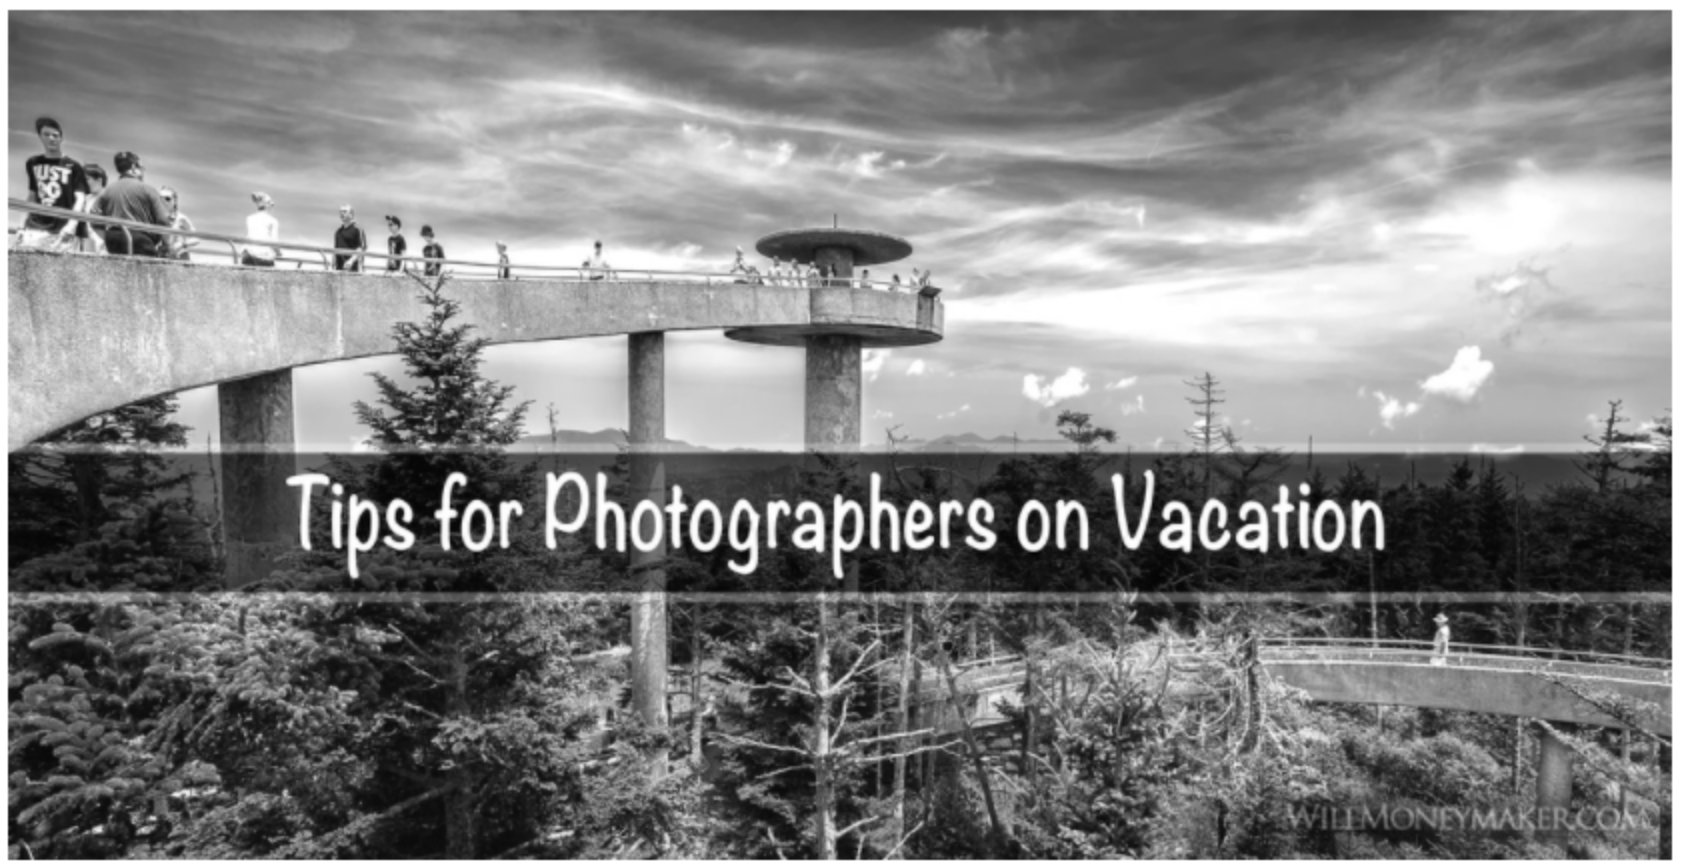 Tips for Photographers on Vacation